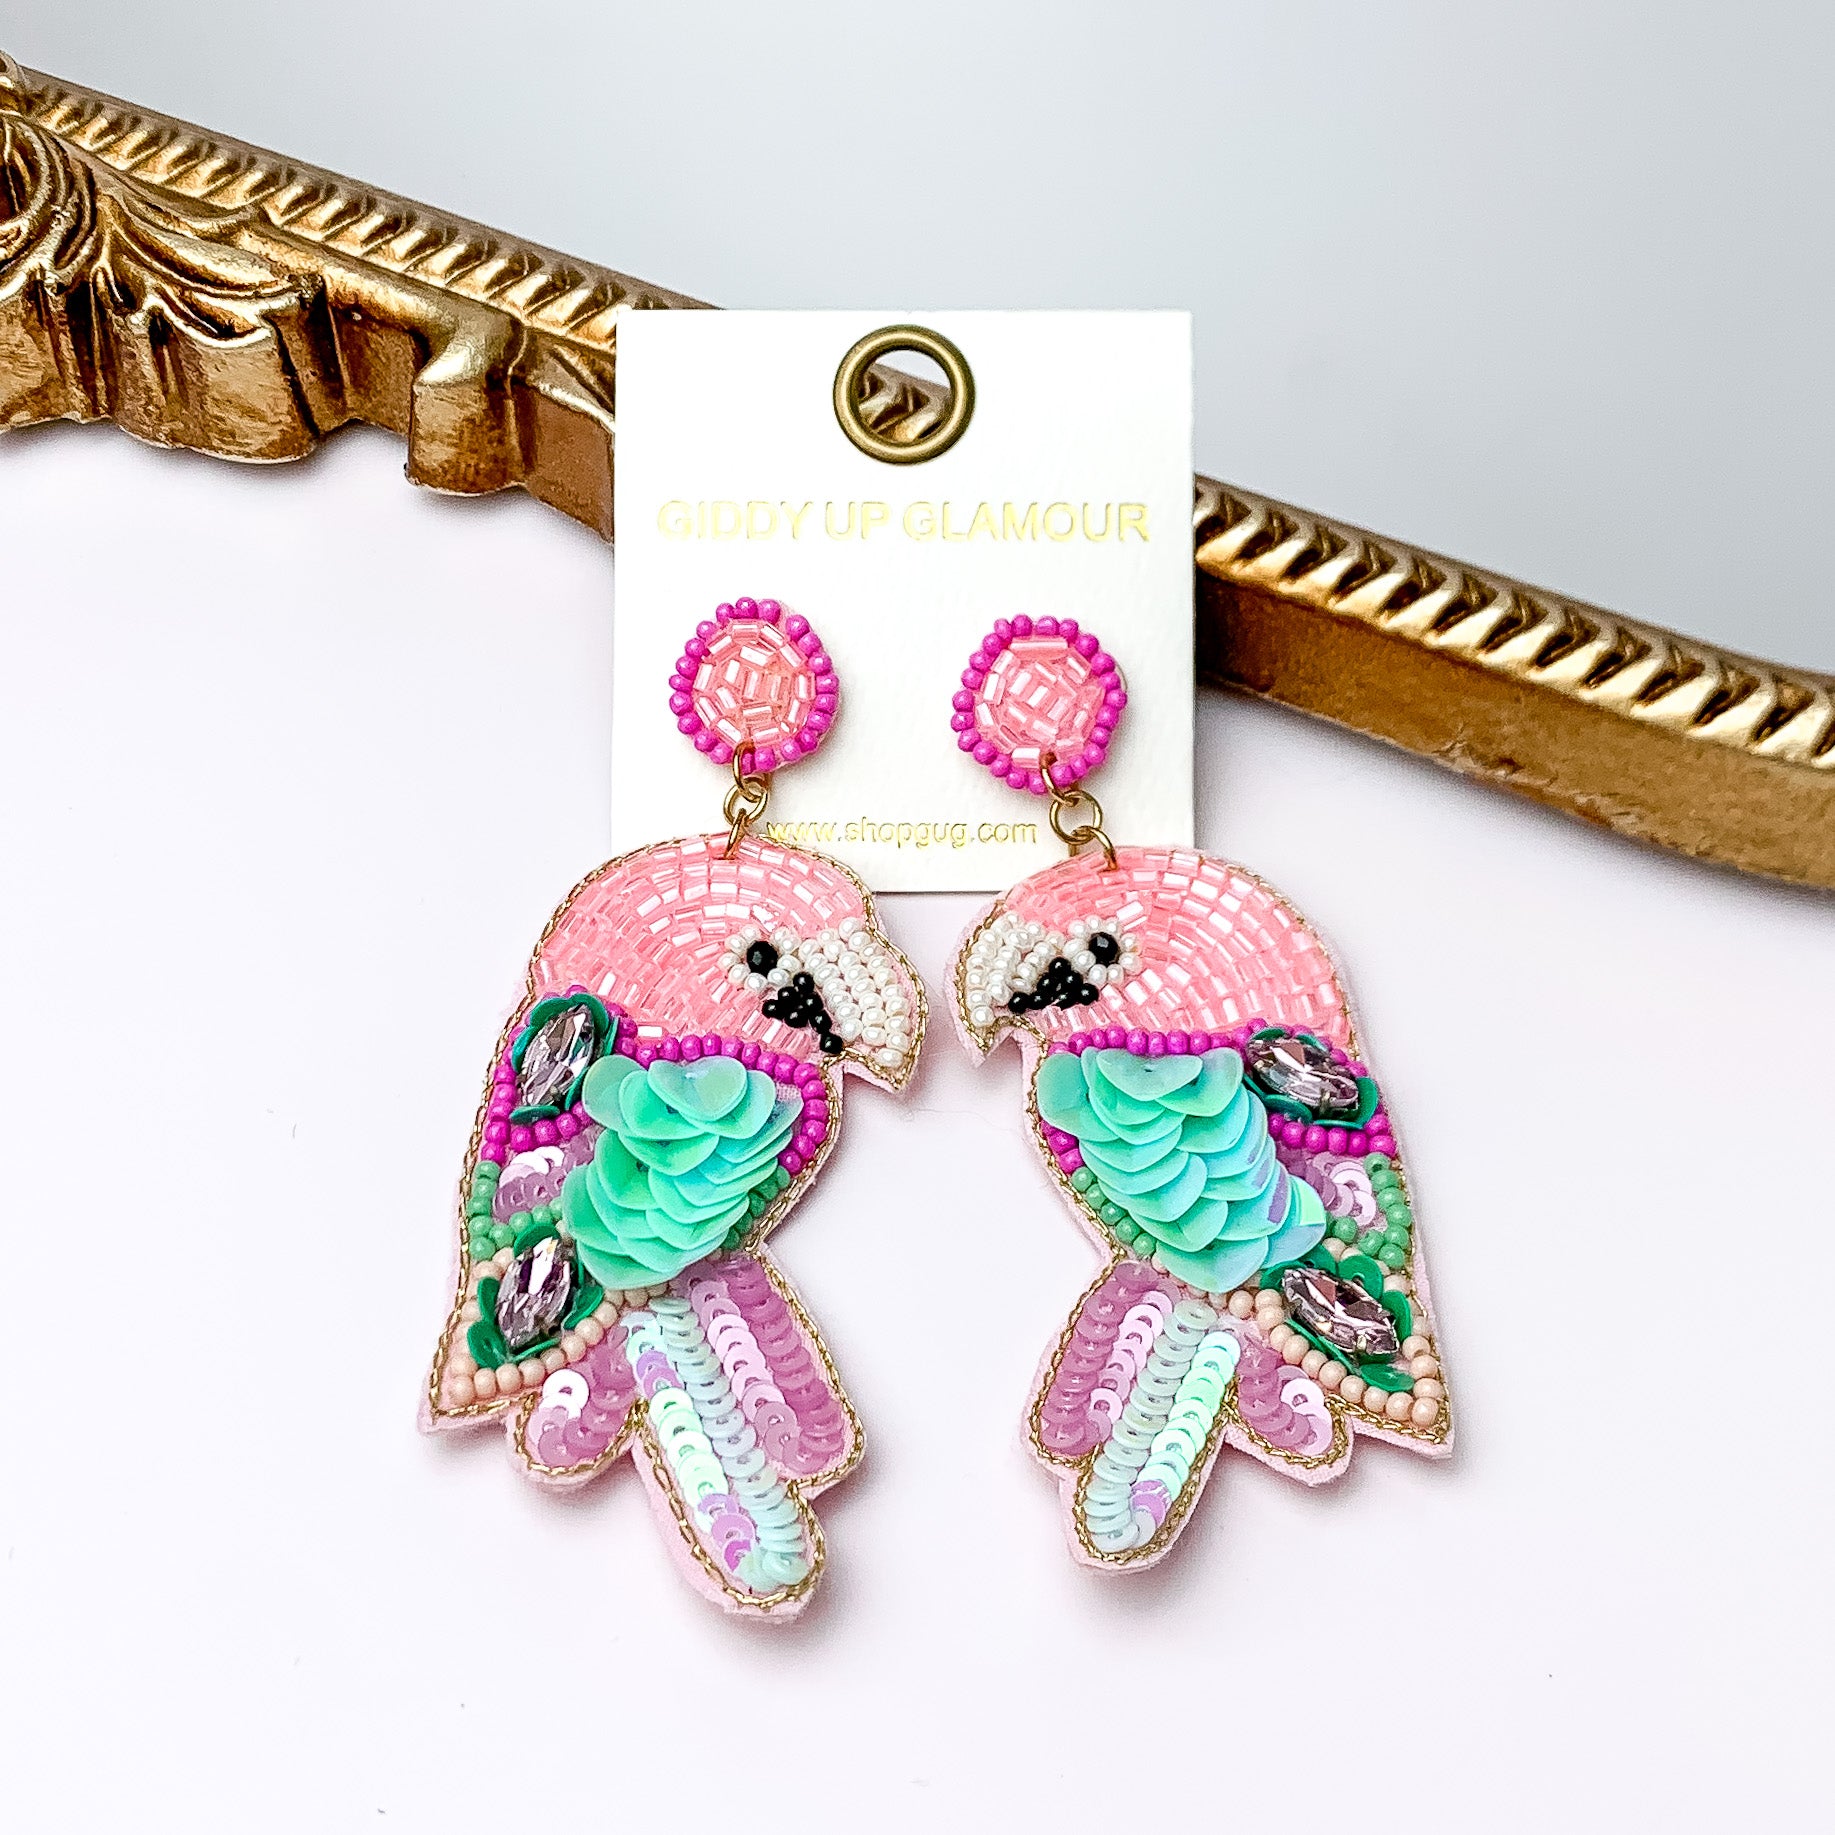 These parrot earrings are pink a little bit of turquoise, green, and purple beads. These earrings are pictured in front of a gold mirror on a white background.